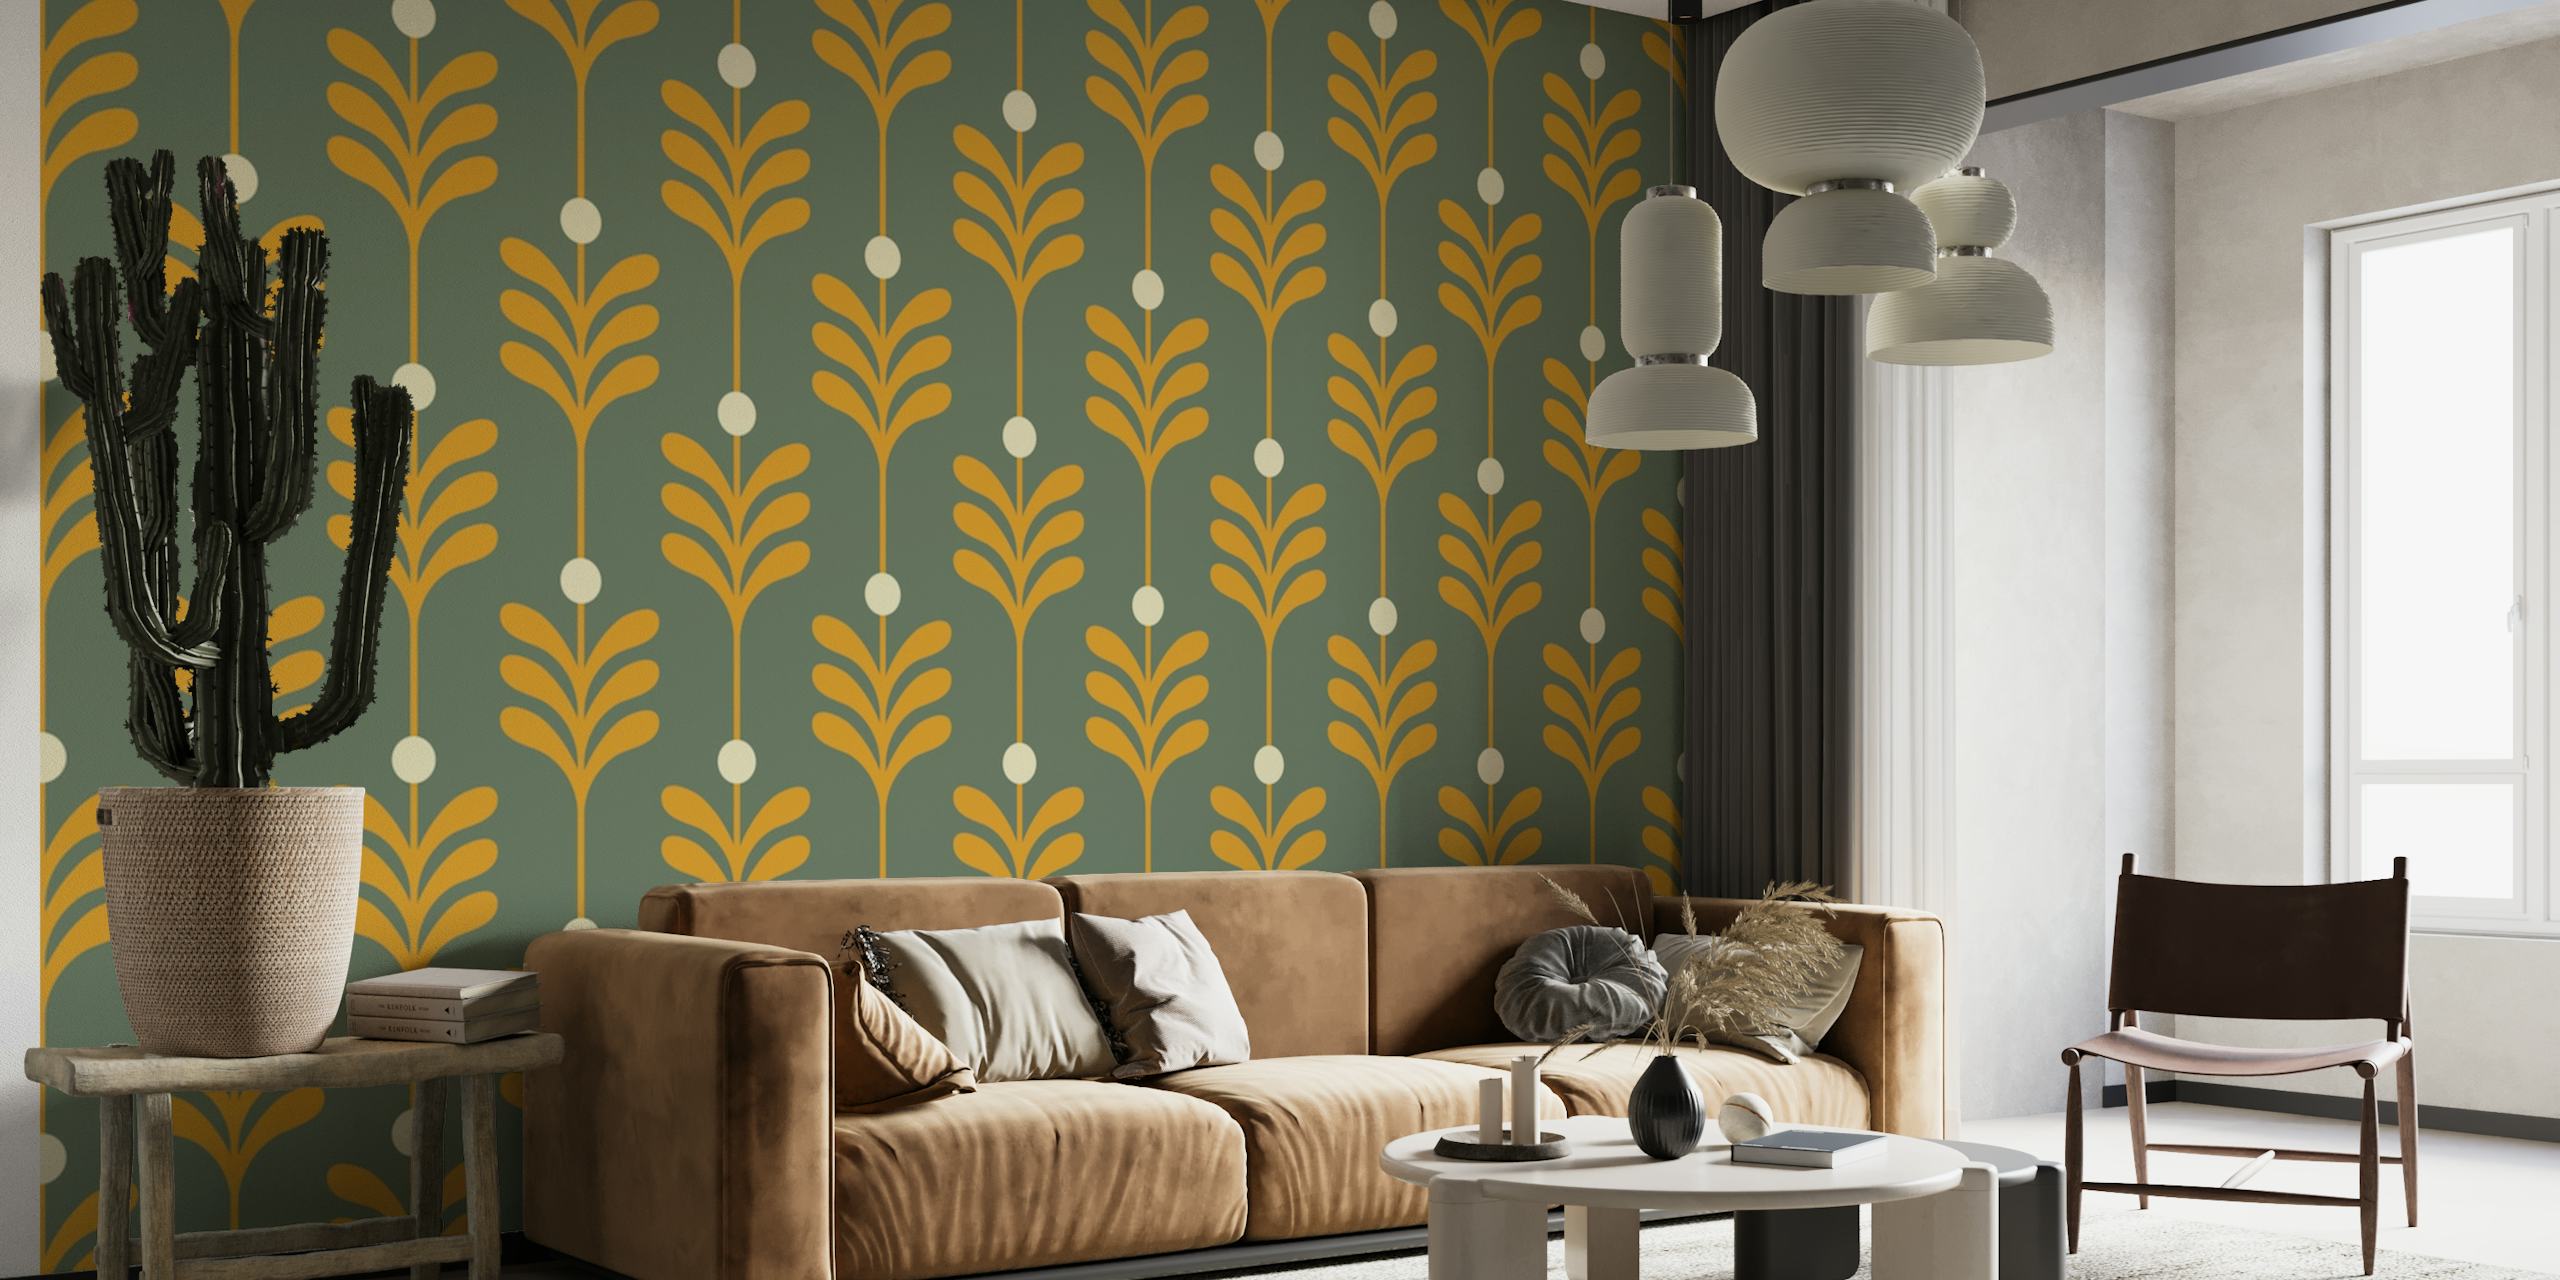 Art Deco style leaves wall mural with golden patterns on teal background